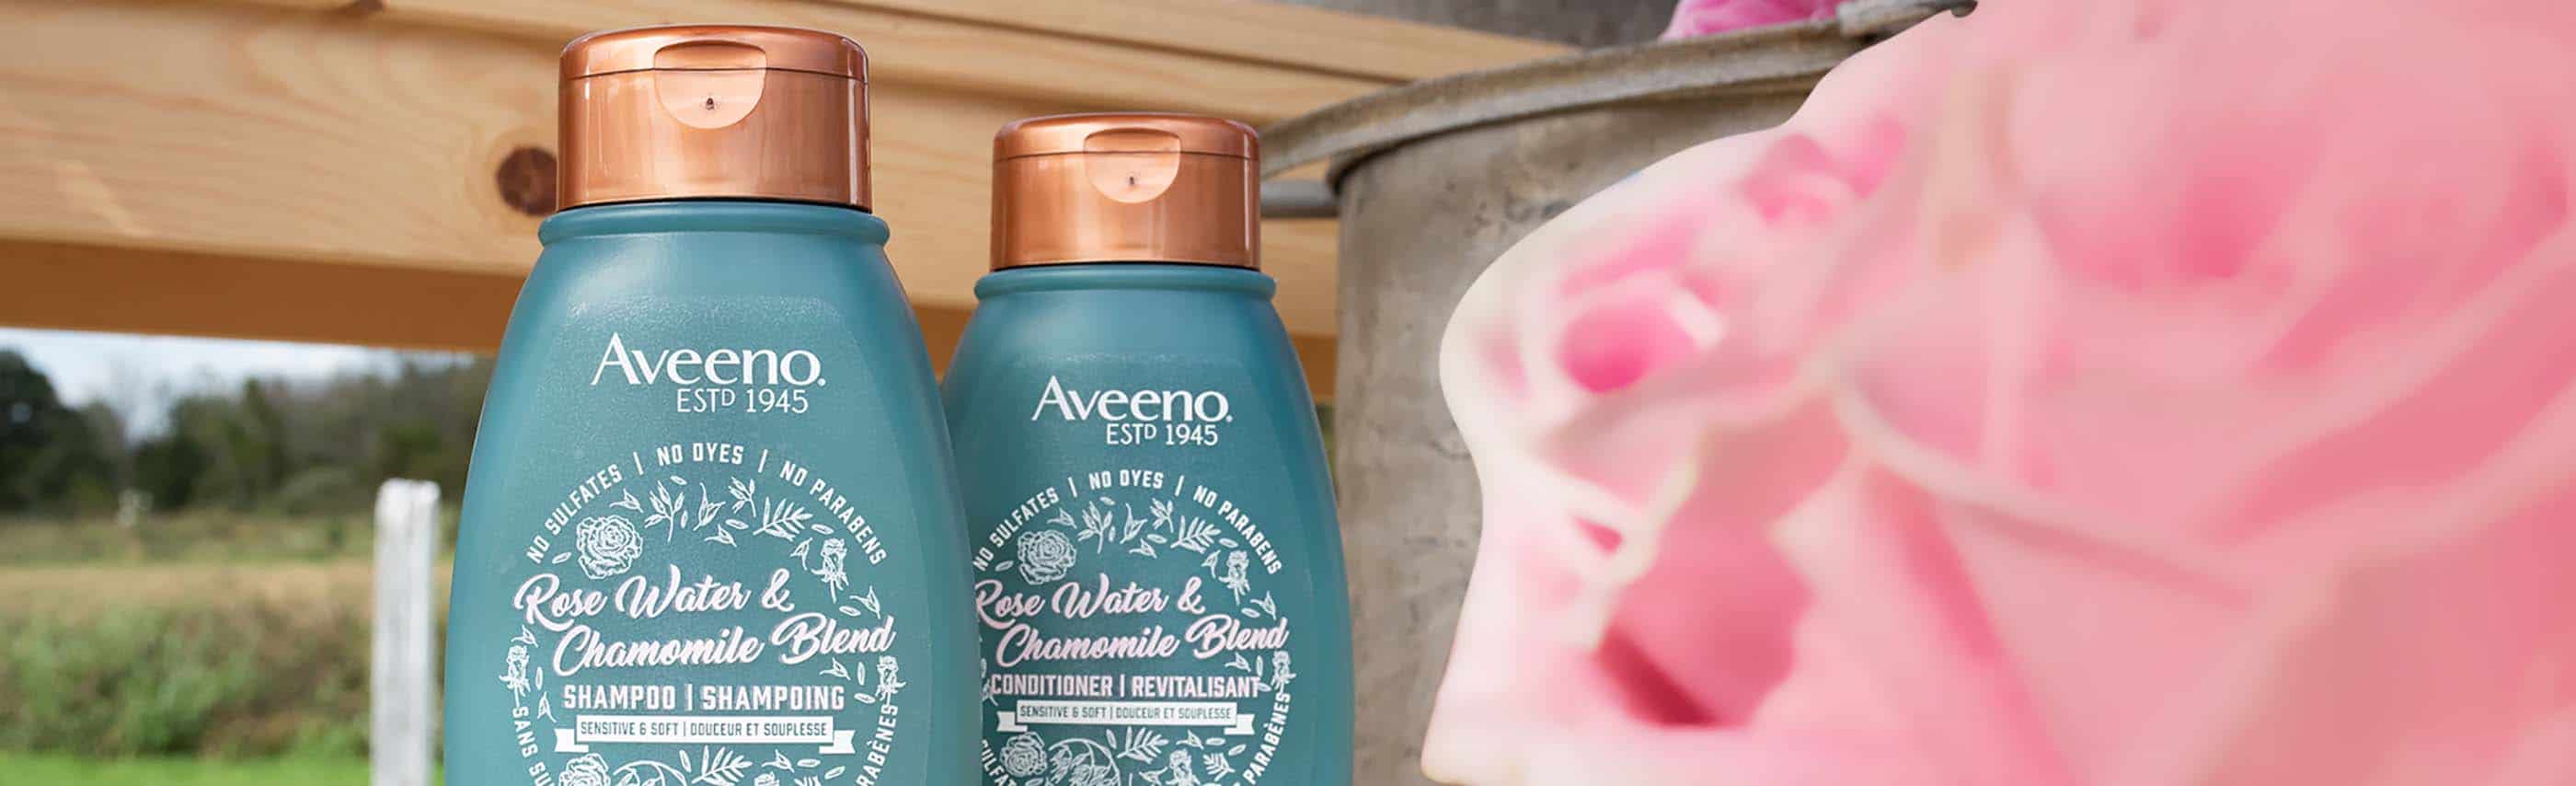 two bottles of aveeno products behind a rose